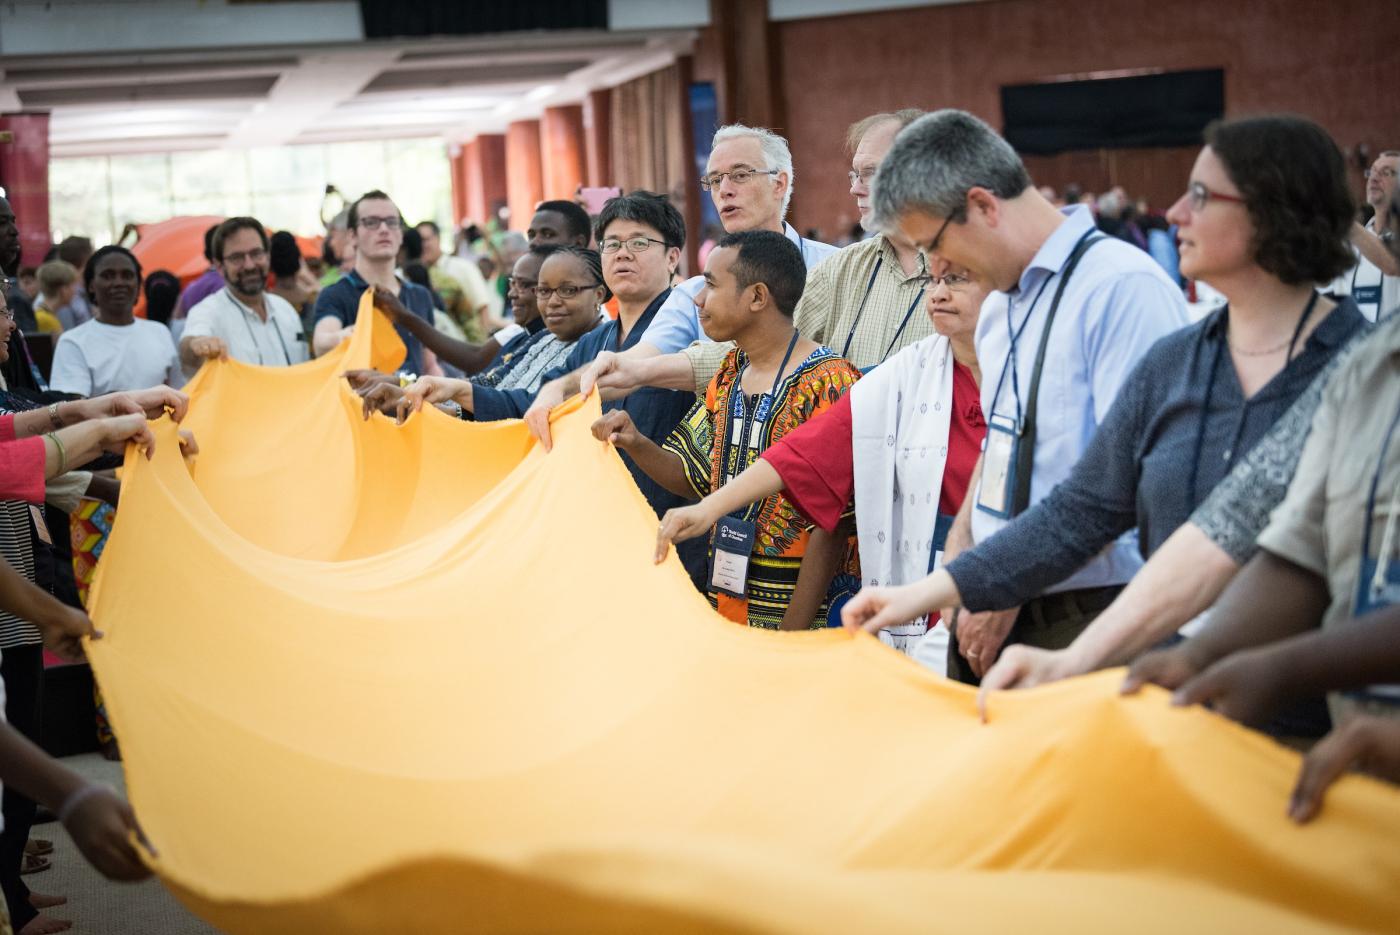 Conference on World Mission and Evangelism, 2018, Tanzania, Photo: Albin Hillert/WCC